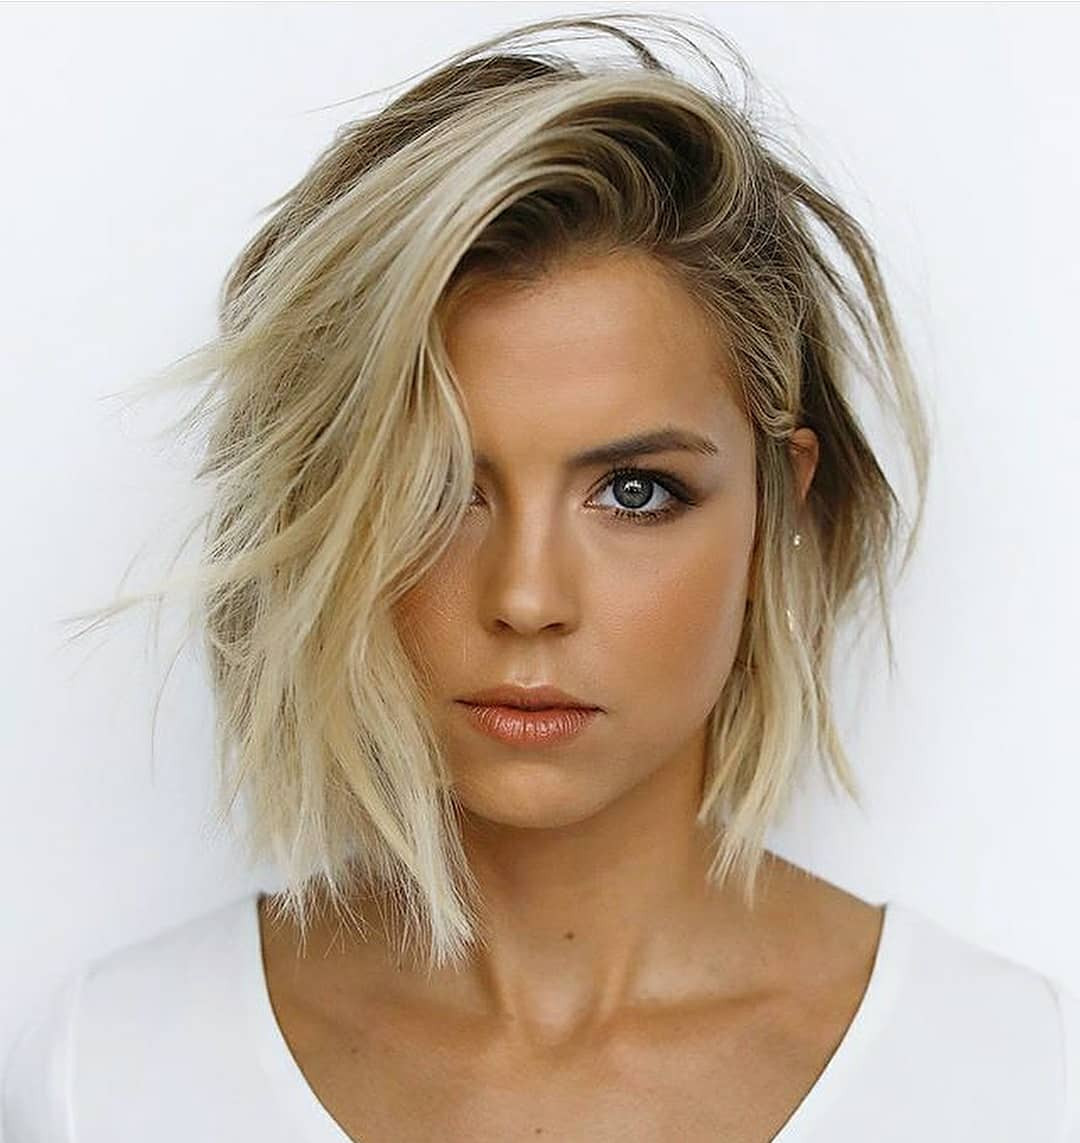 Hairstyles For Bobs
 Ten Trendy Short Bob Haircuts for Female Best Short Hair